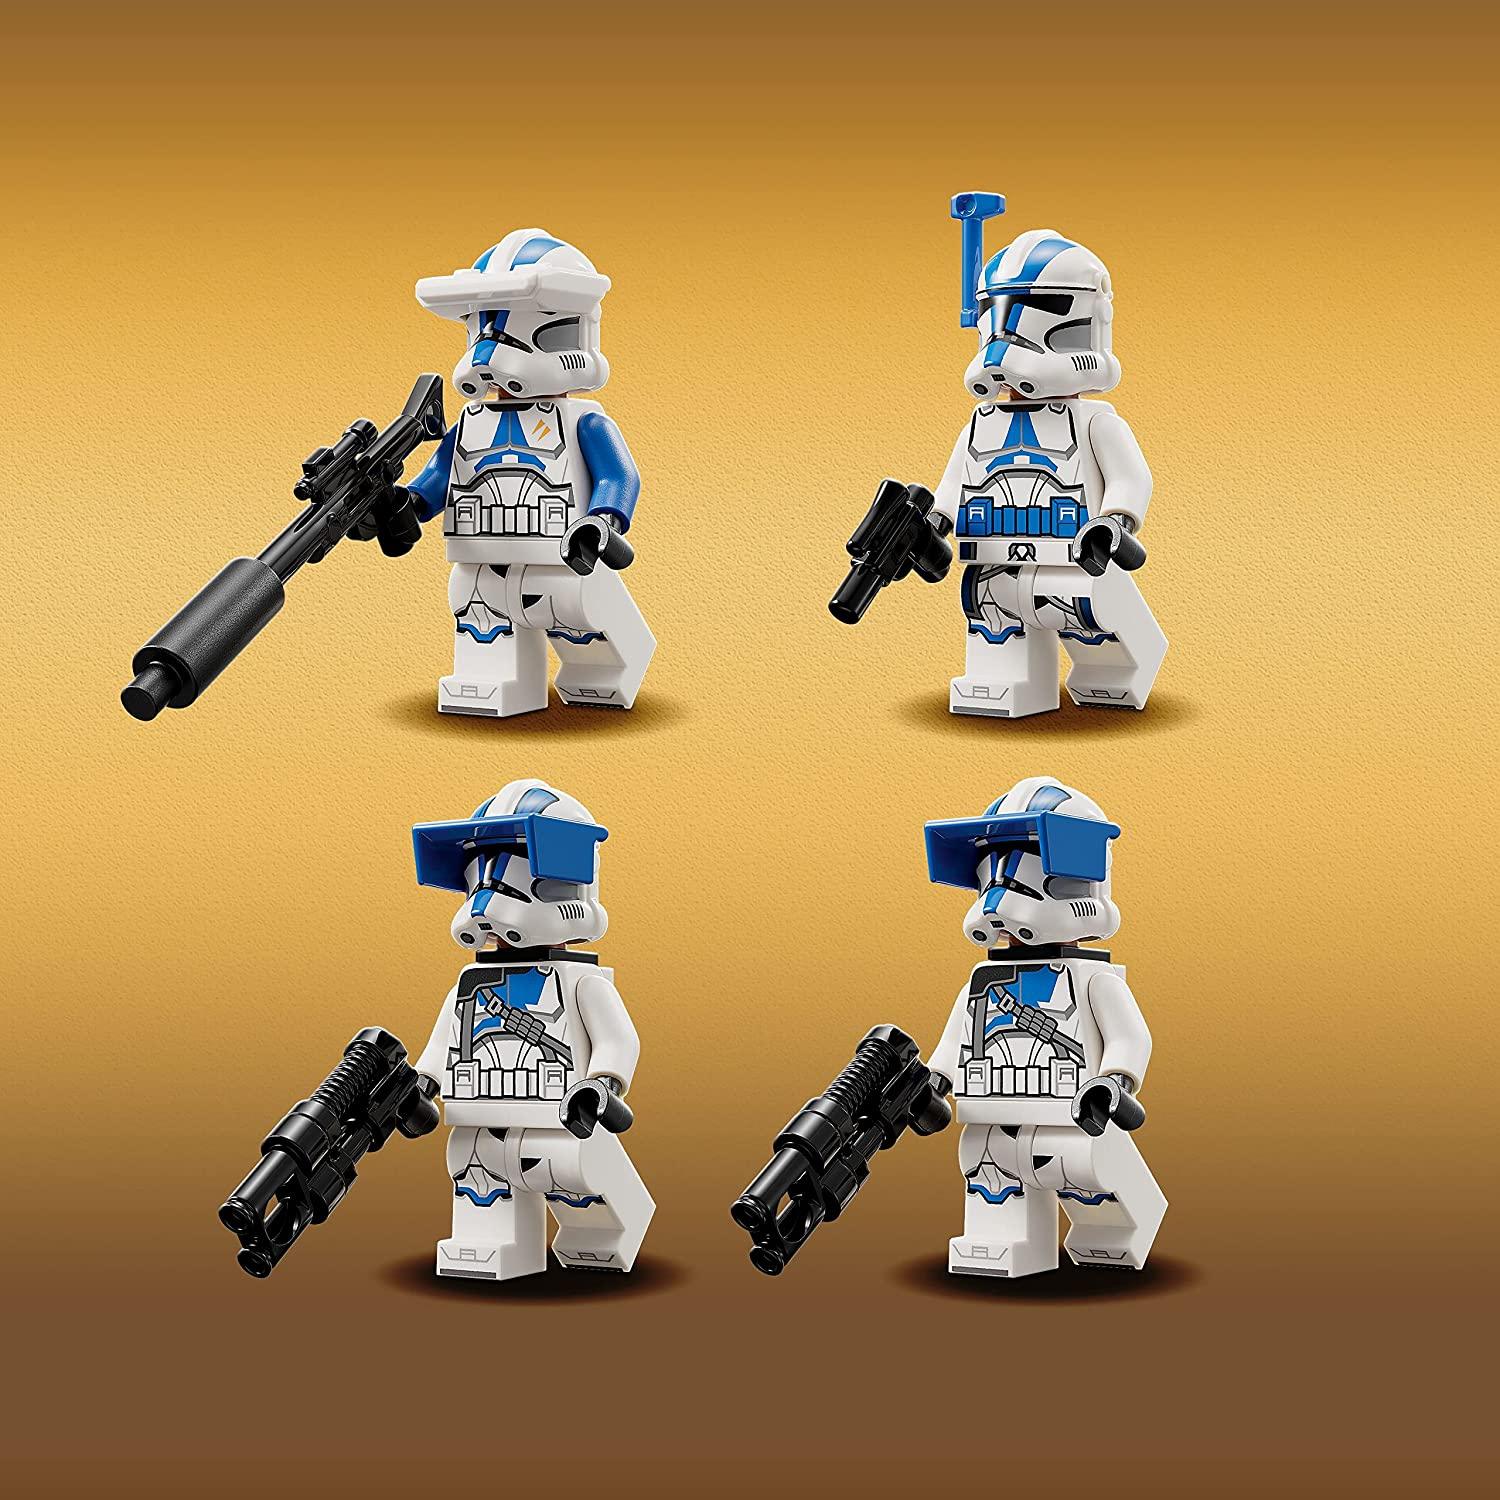 LEGO Star Wars 501st Clone Troopers Battle Pack 75345 Building Toy Set - BumbleToys - 8+ Years, 8-13 Years, Boys, LEGO, Mandalorian, OXE, Pre-Order, star wars